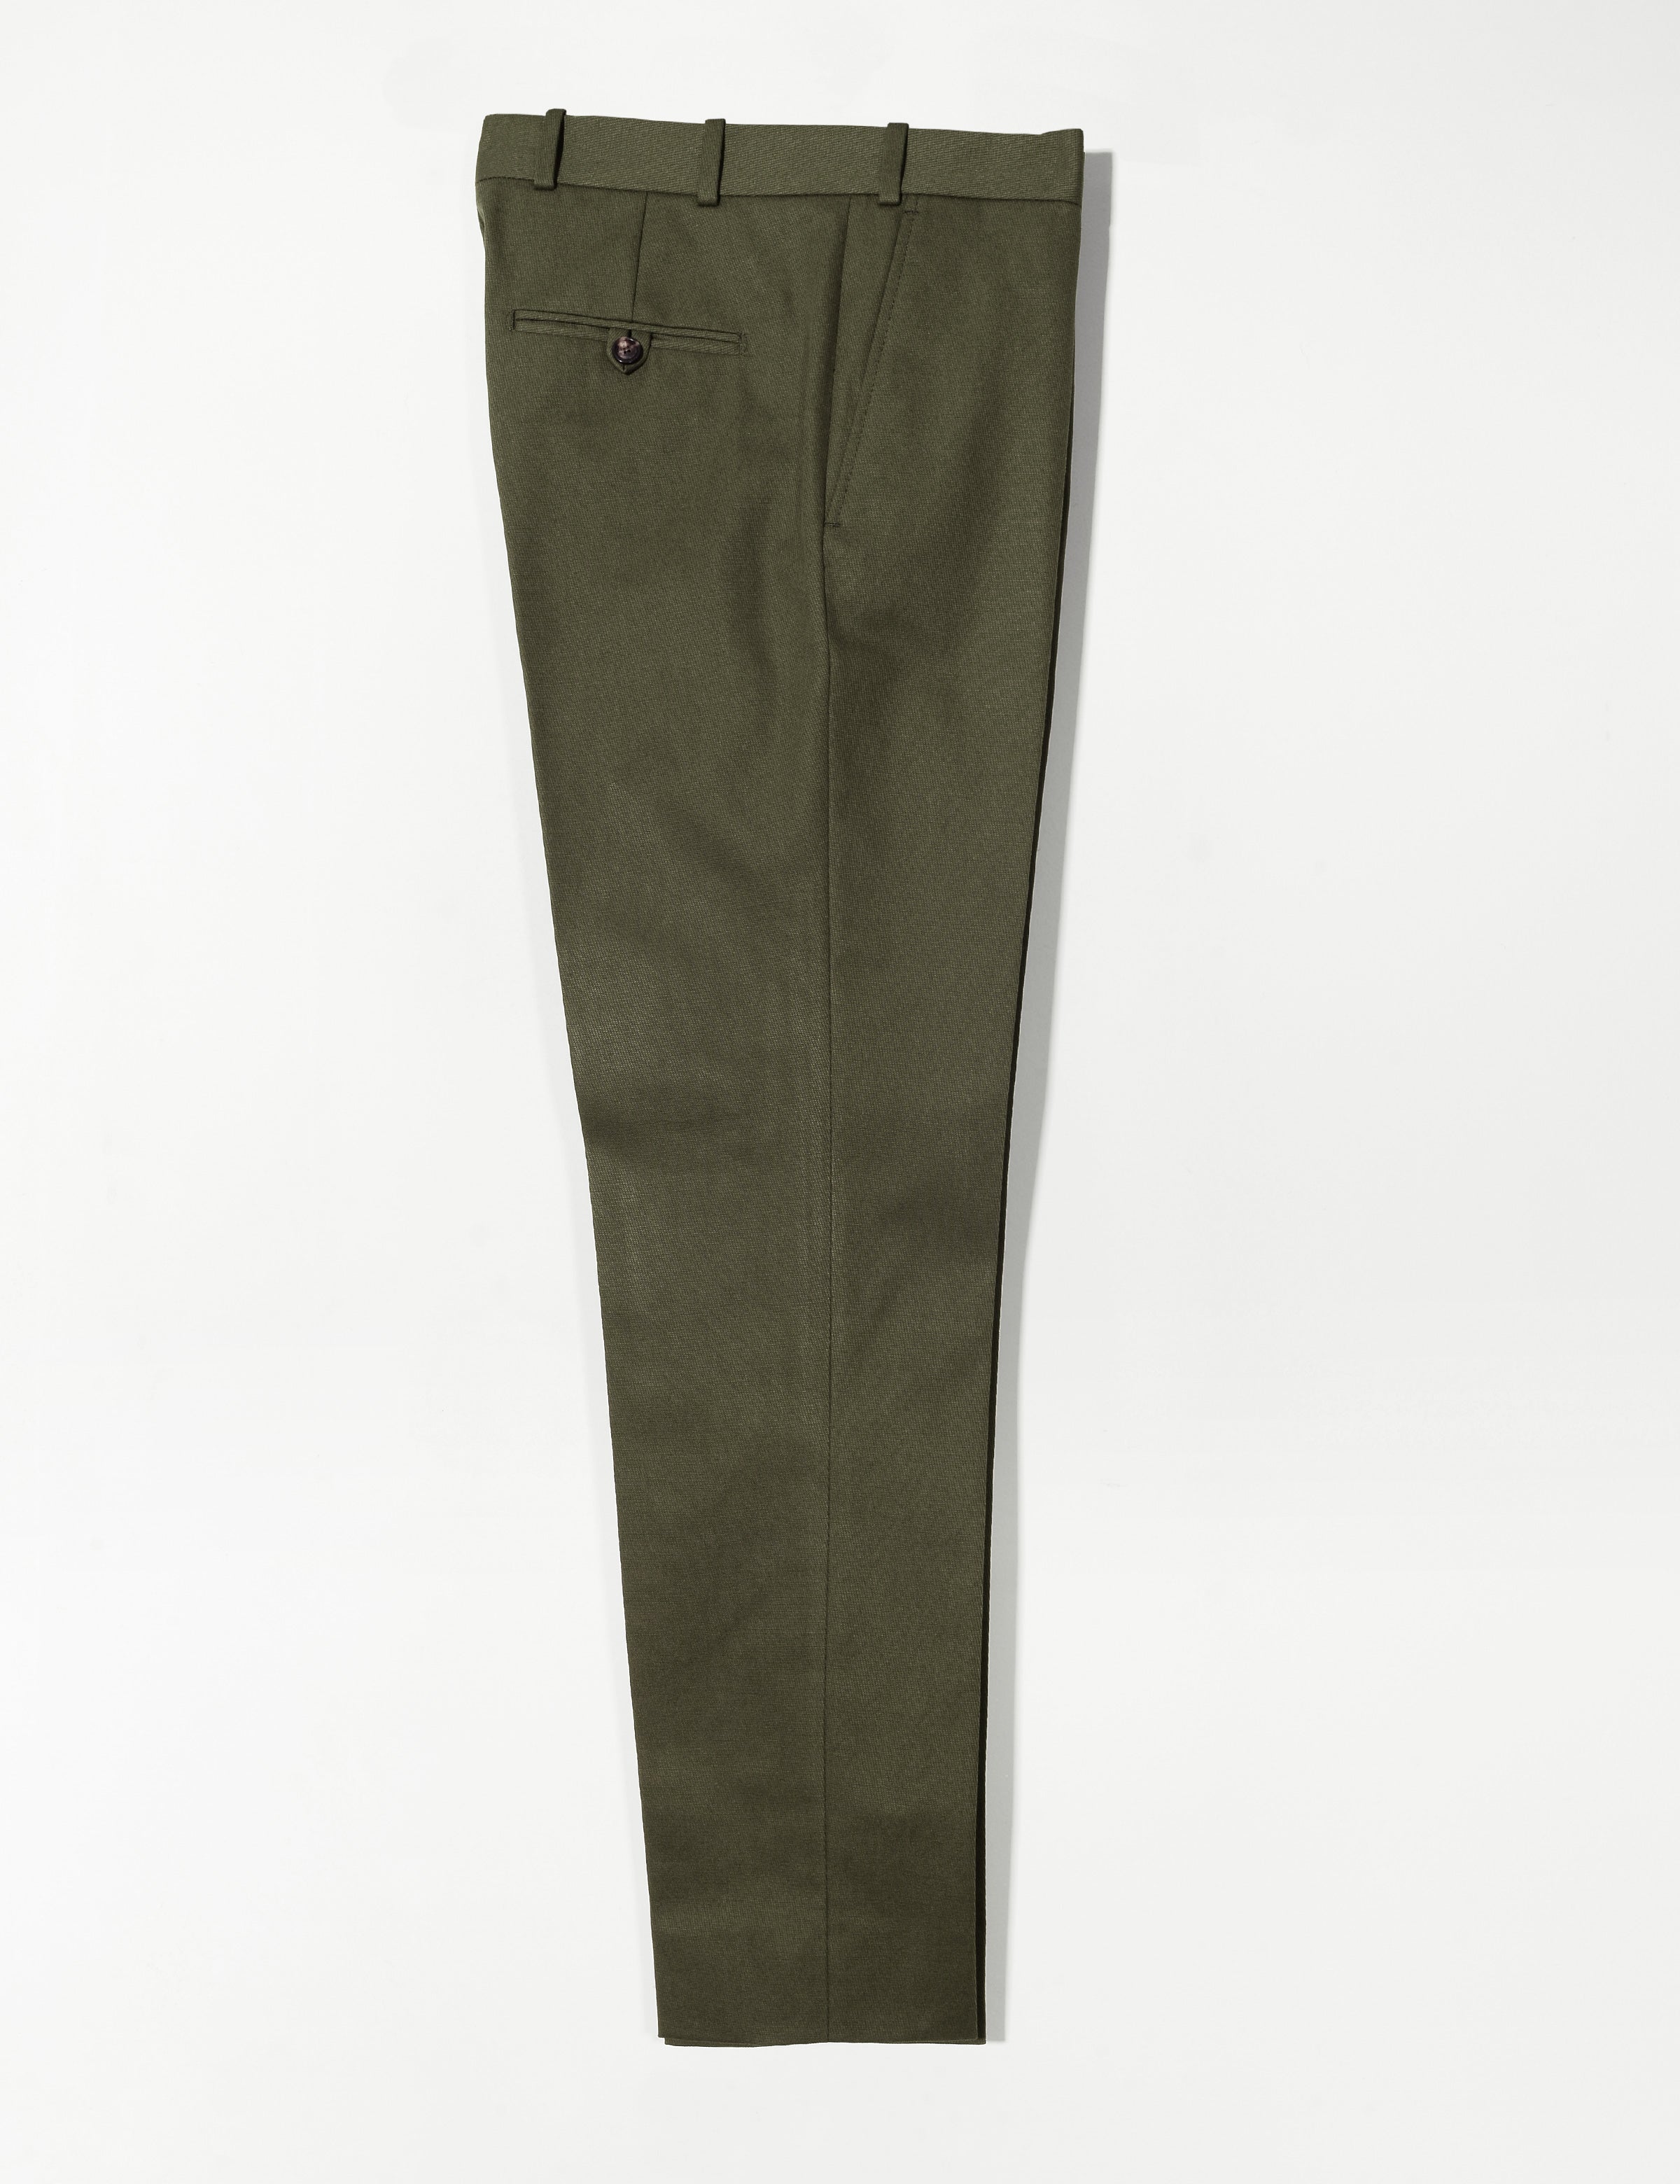 Green Formal Cavalry Twill Trousers